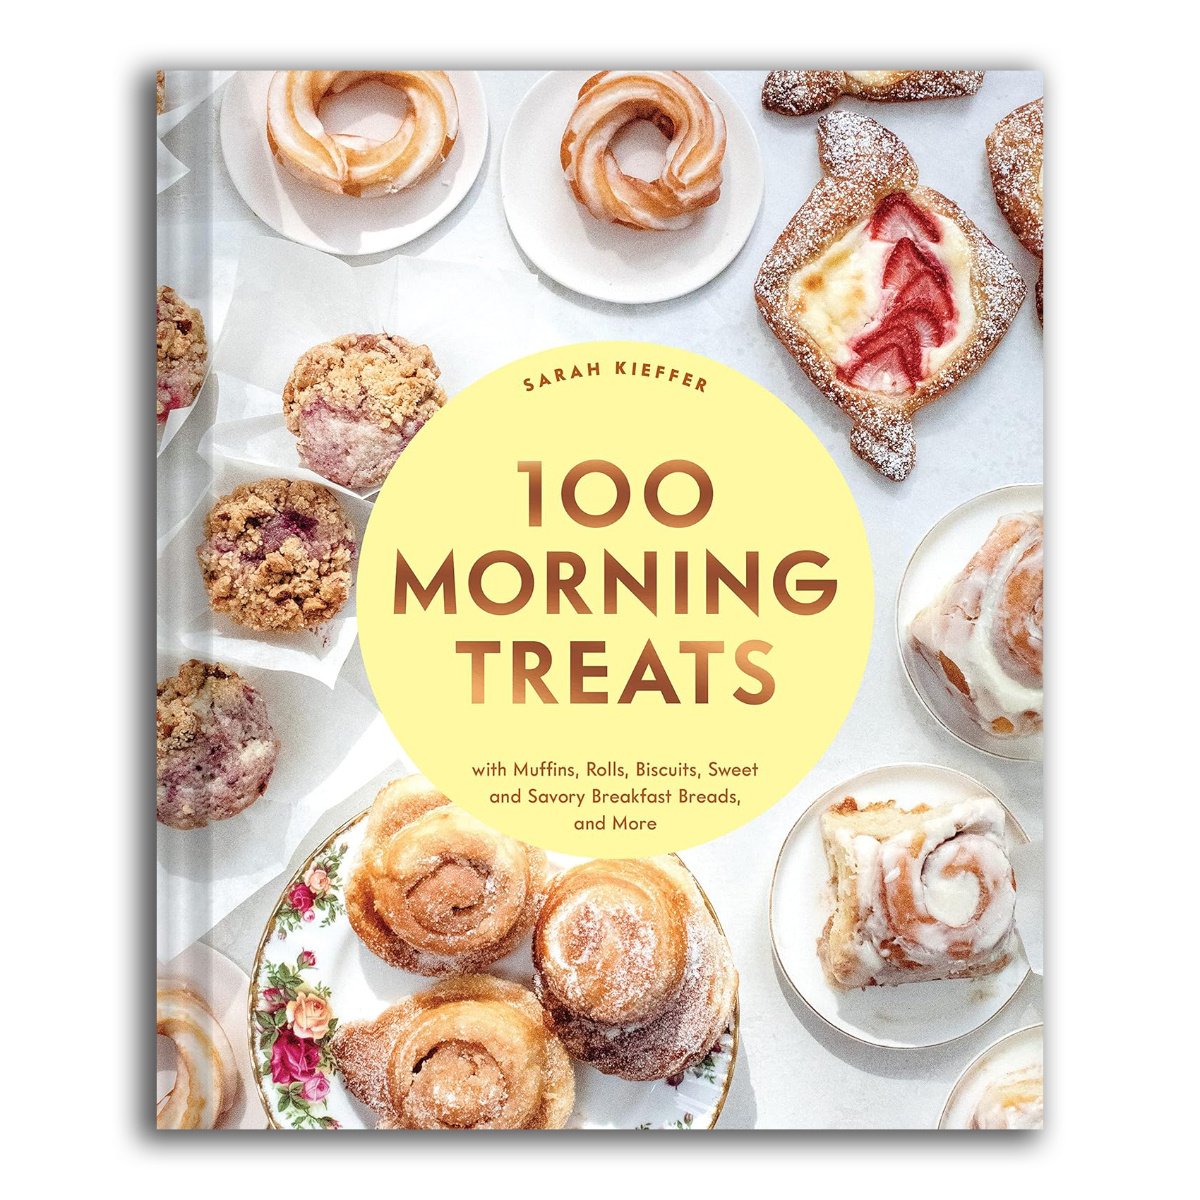 Chronicle Books - CB 100 Morning Treats: With Muffins, Rolls, Biscuits, Sweet and Savory Breakfast Breads, and More by Sarah Kieffer